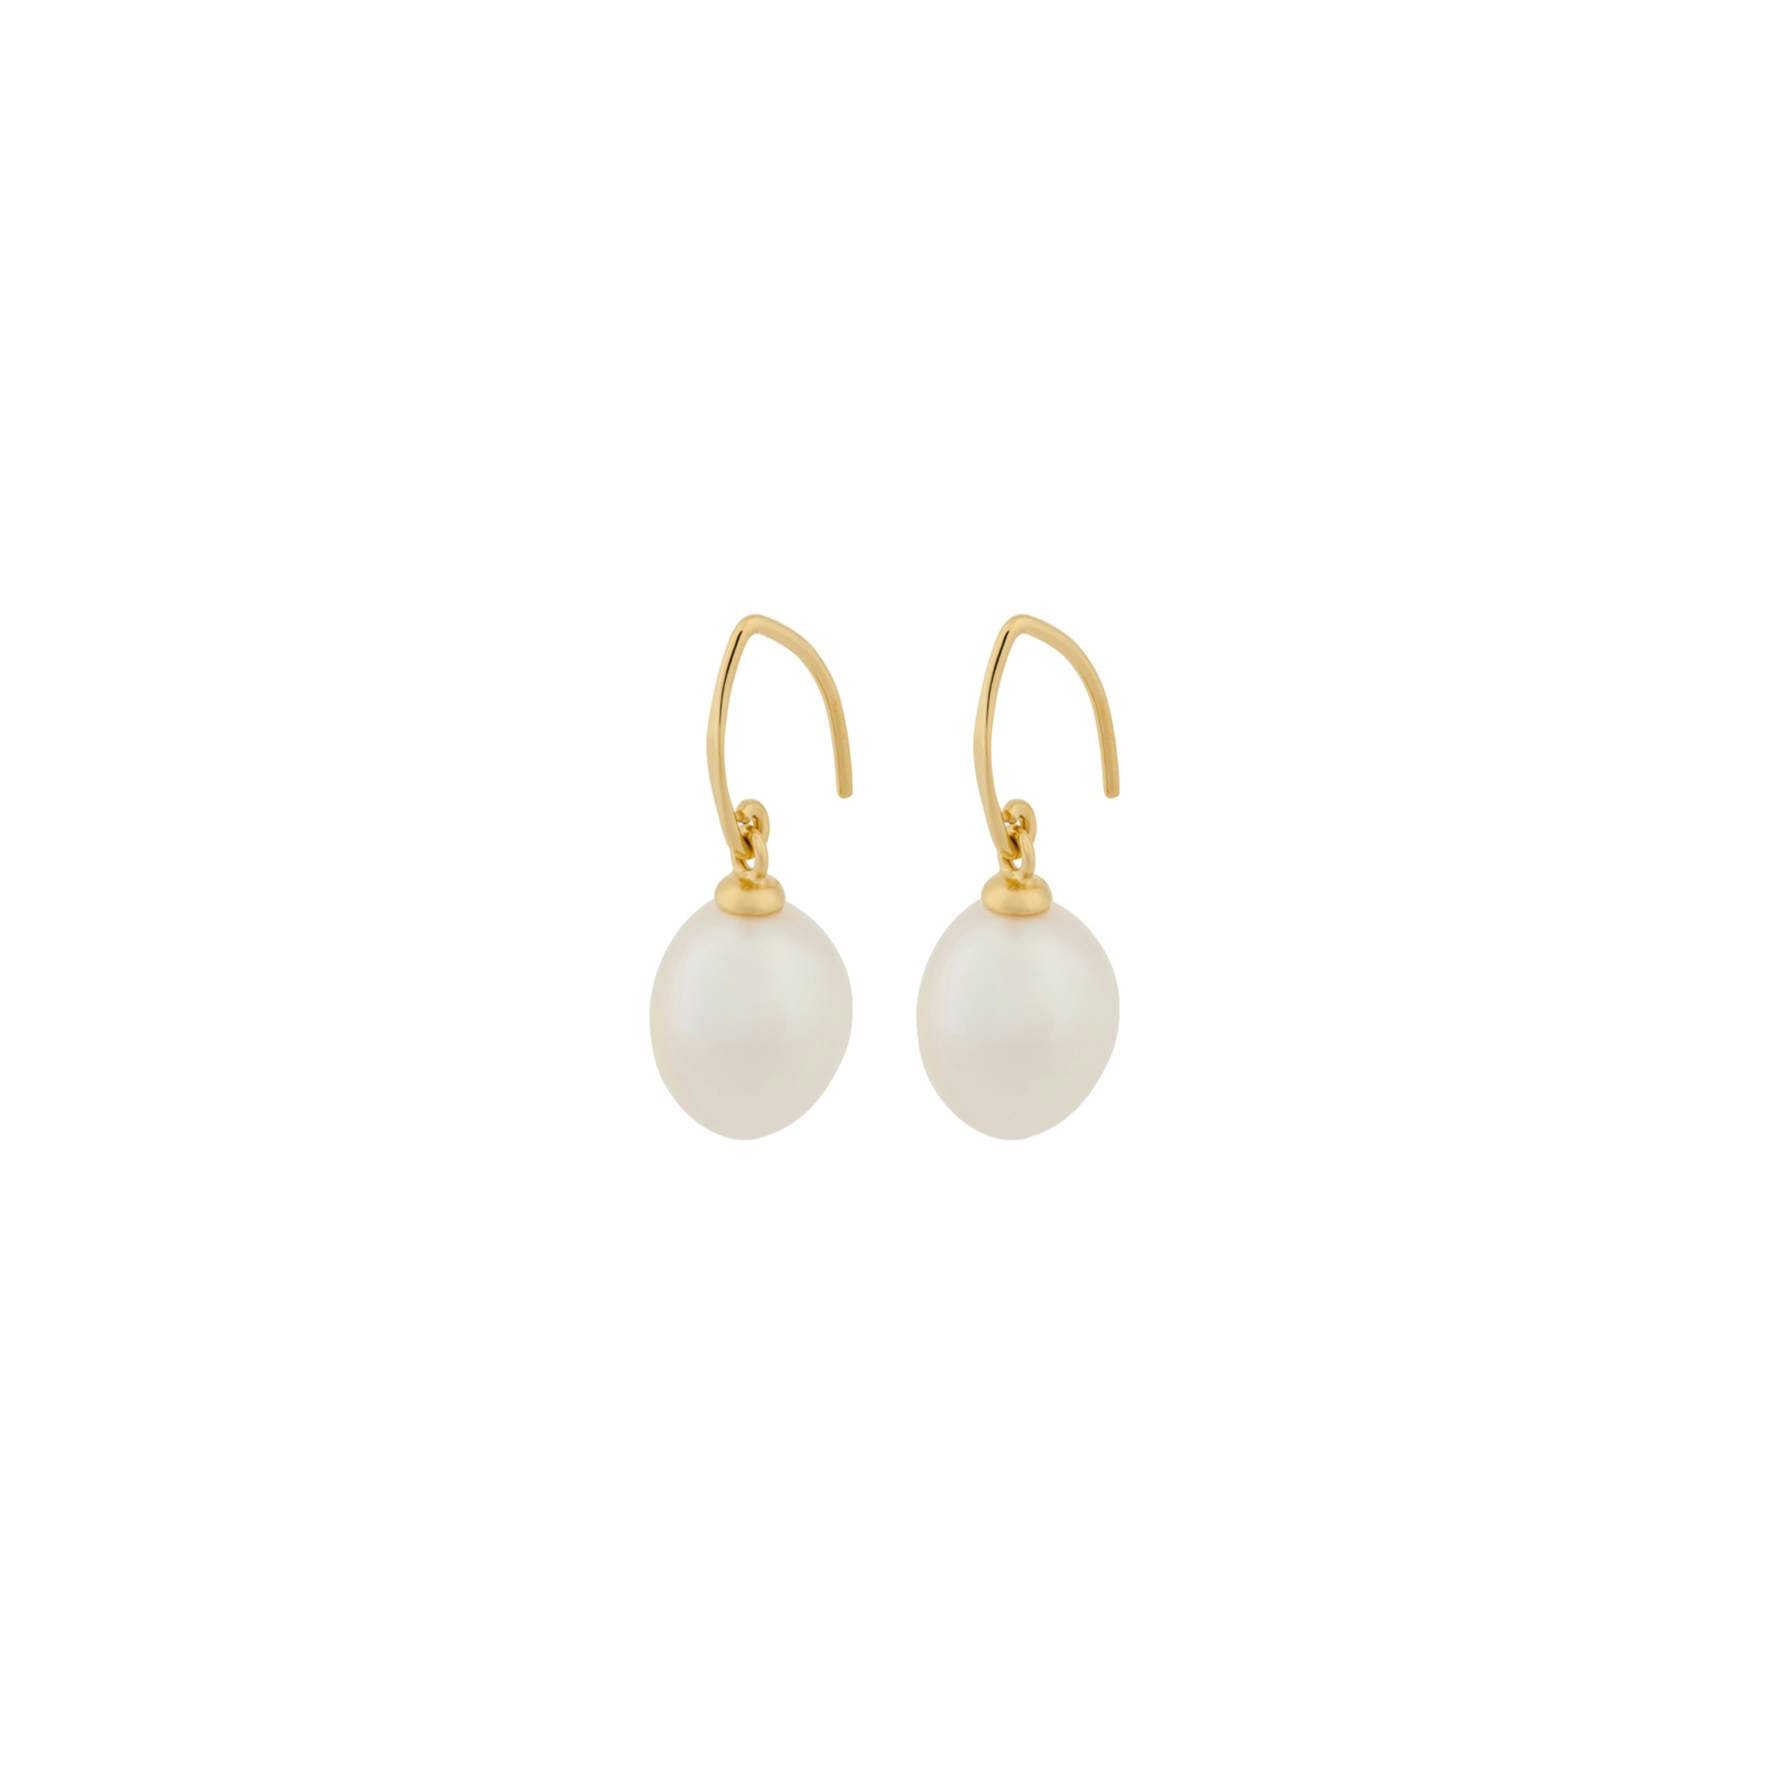 Lagoon Earhooks from Pernille Corydon in Goldplated-Silver Sterling 925